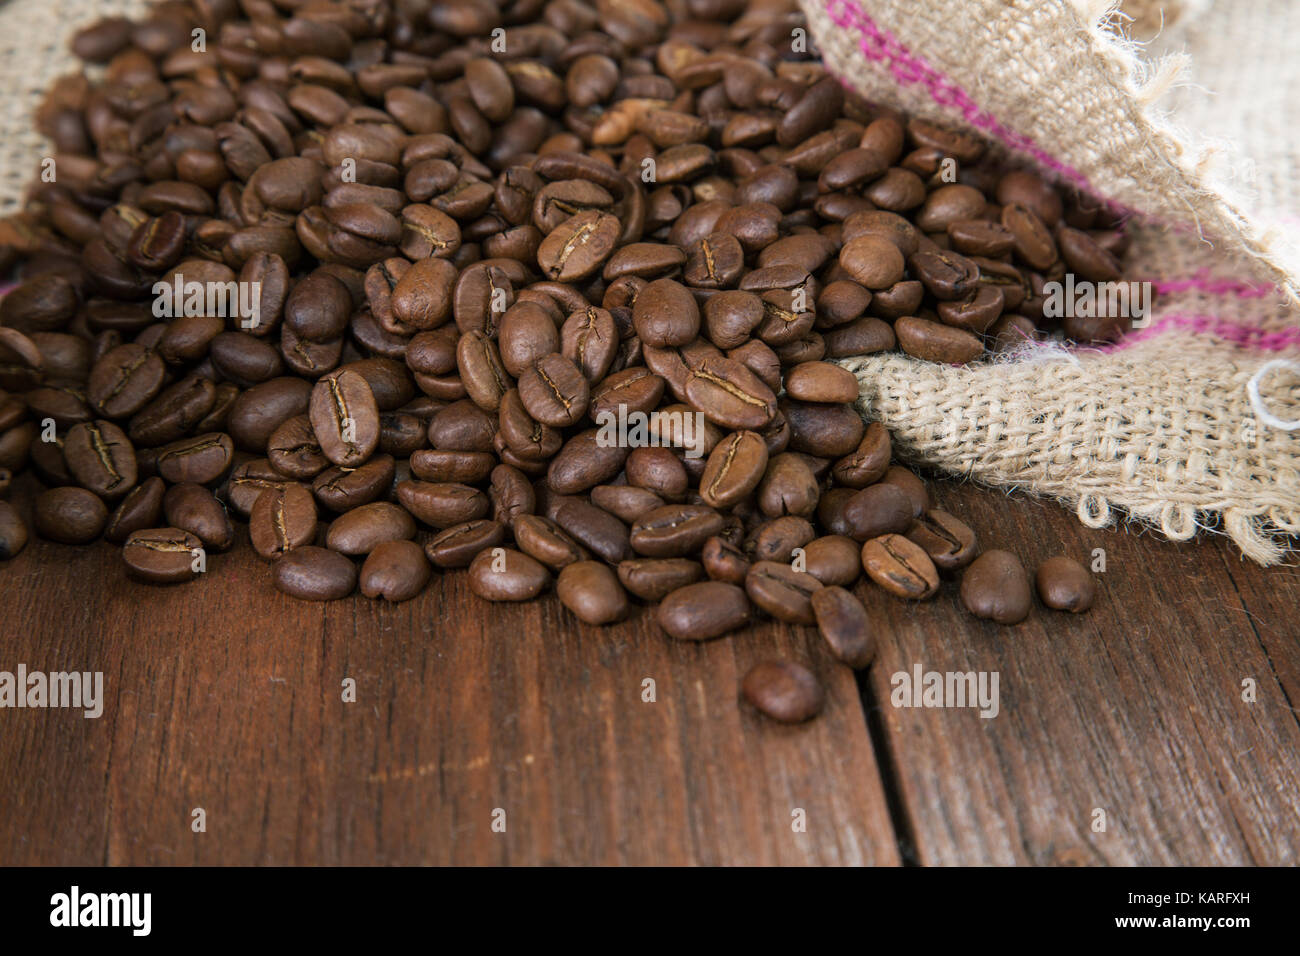 COFFEE GRAIN IN A BAG ON A RURAL TABLE Stock Photo